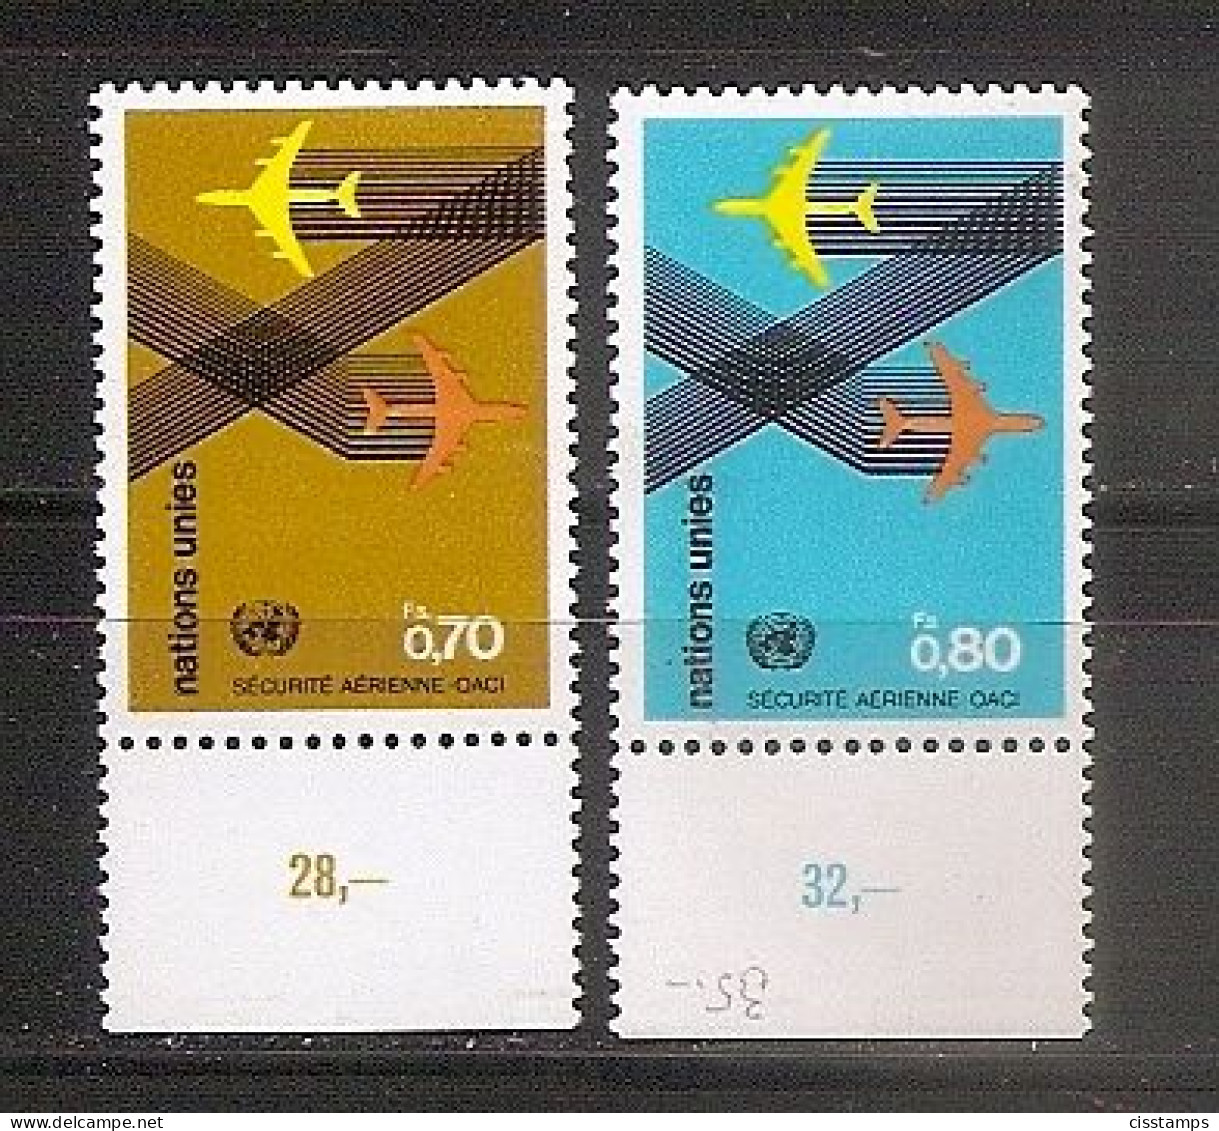 UNITED NATIONS GENEVA 1978●ICAO Safety In The Air●Mi 76-77●MNH - Ongebruikt